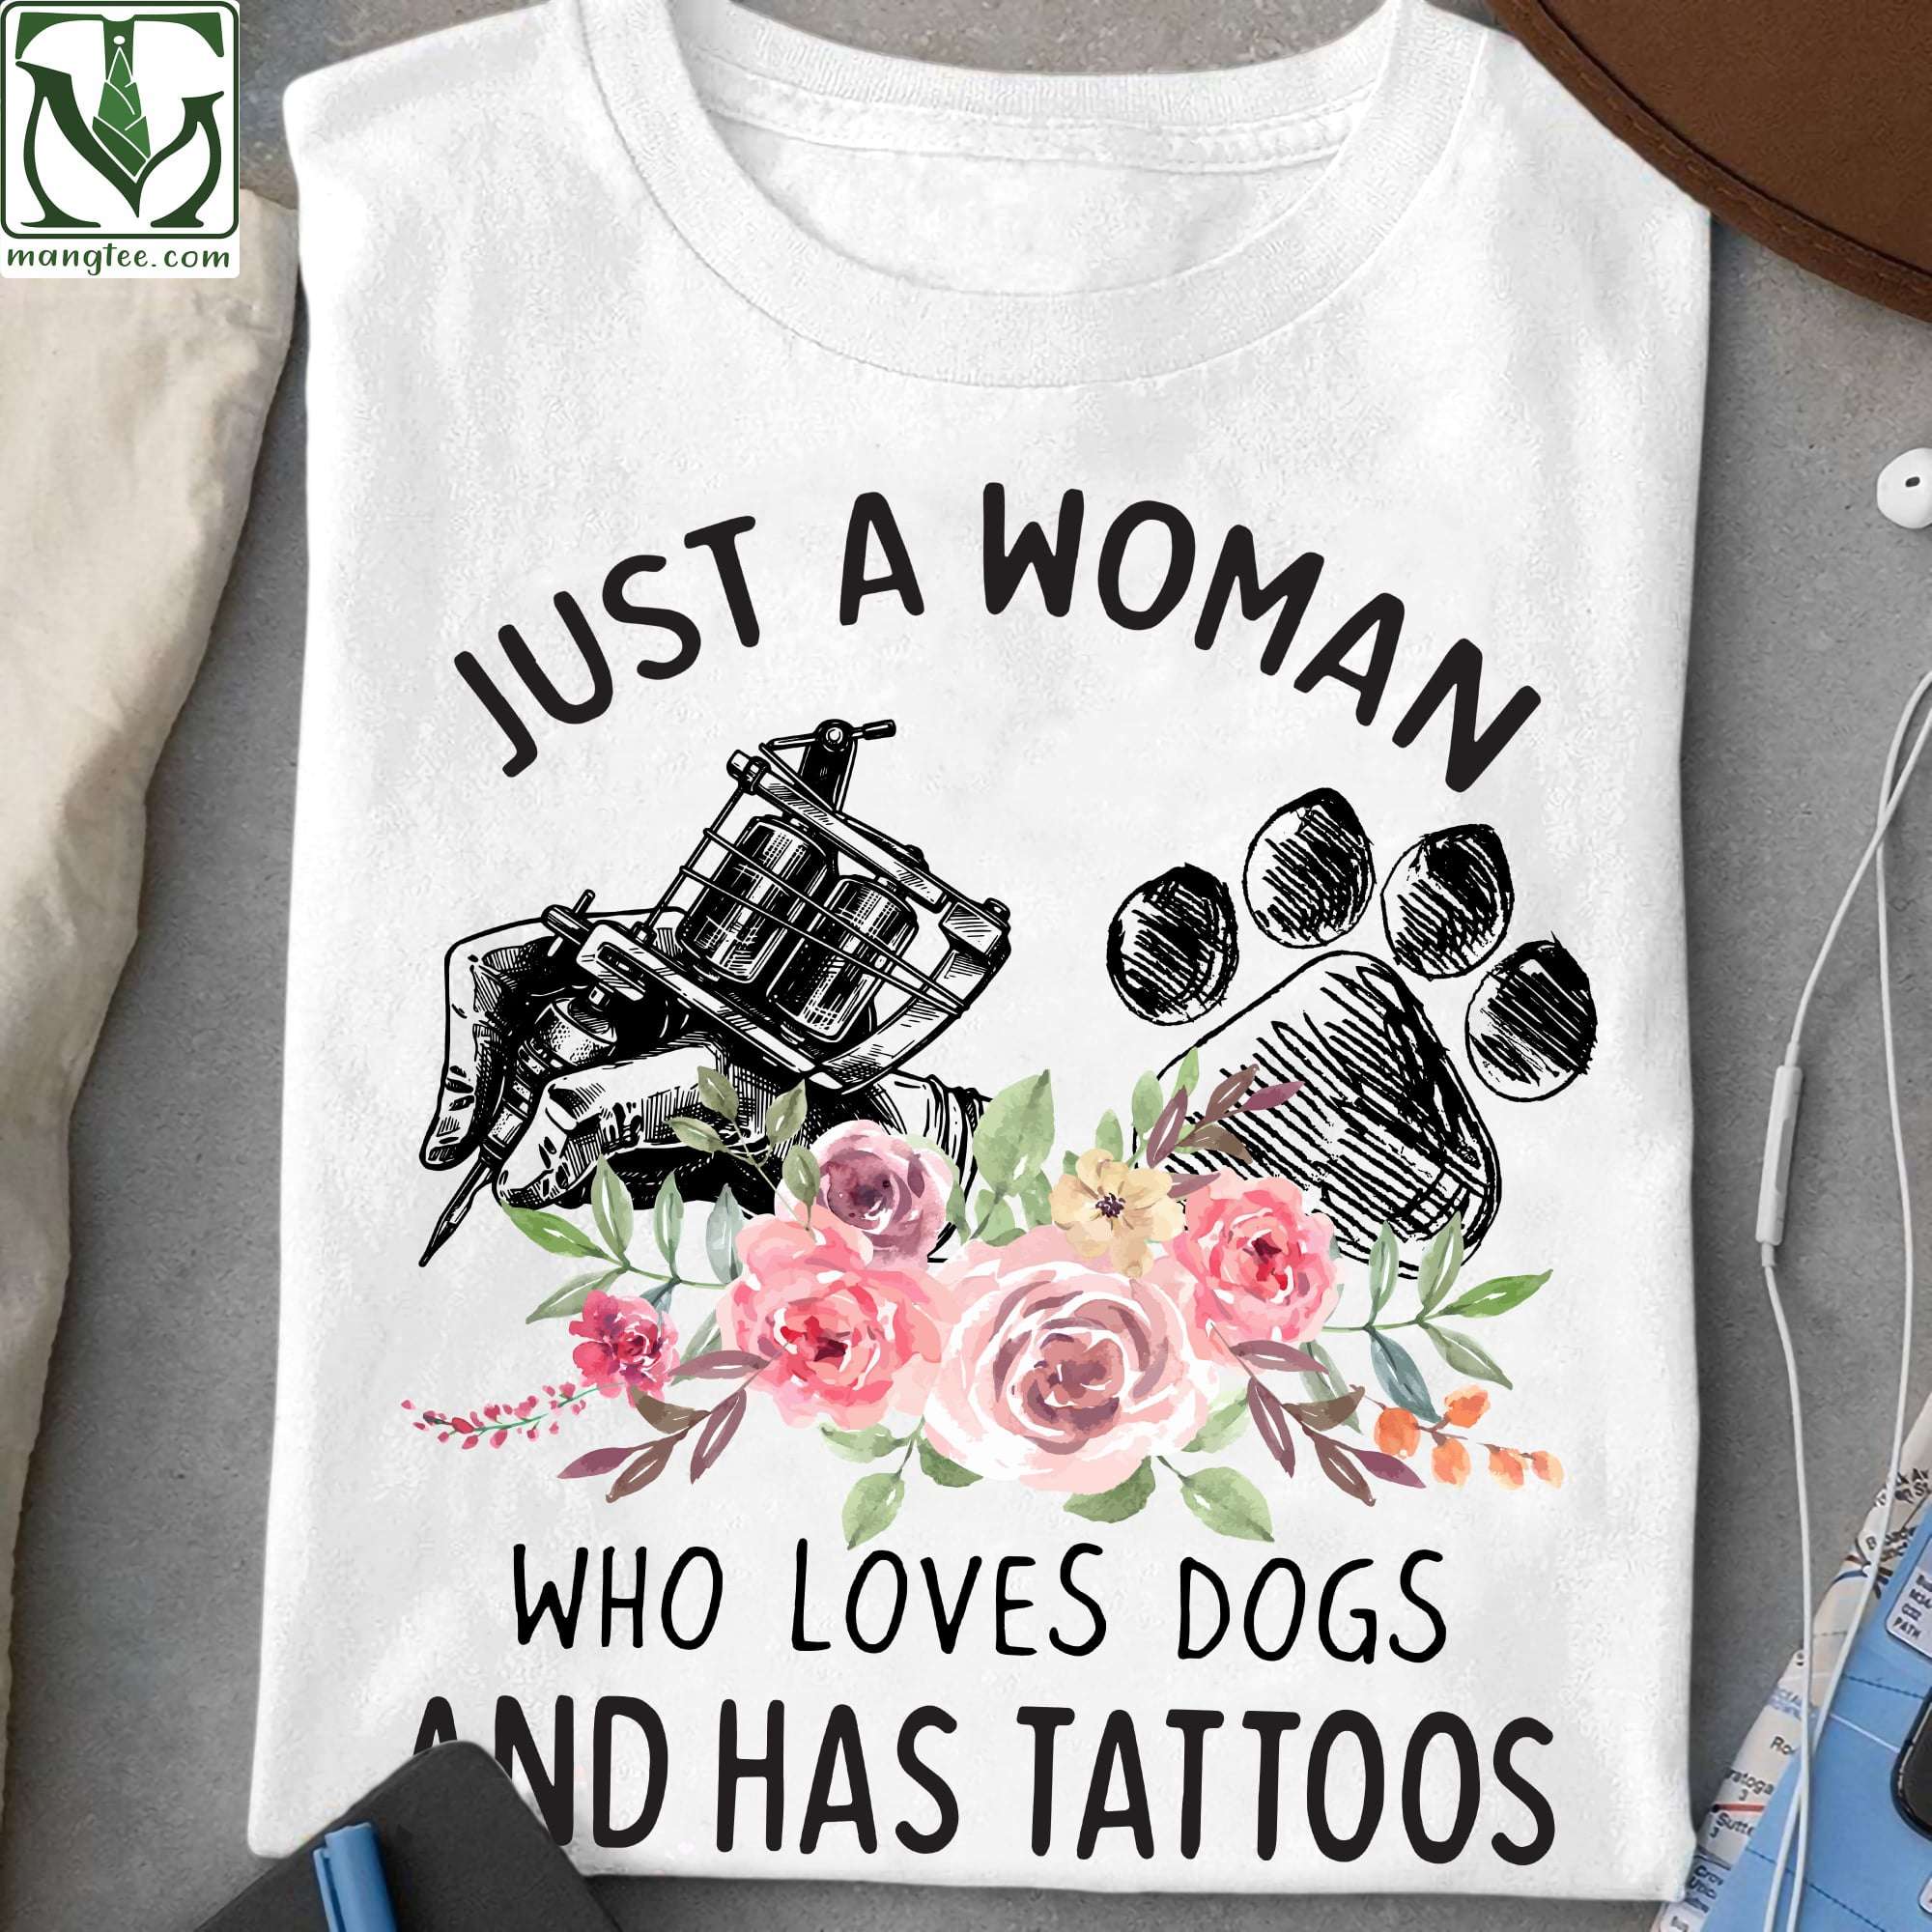 Just a woman who loves dogs and has tattoos - Tattooed woman, tattoo machine